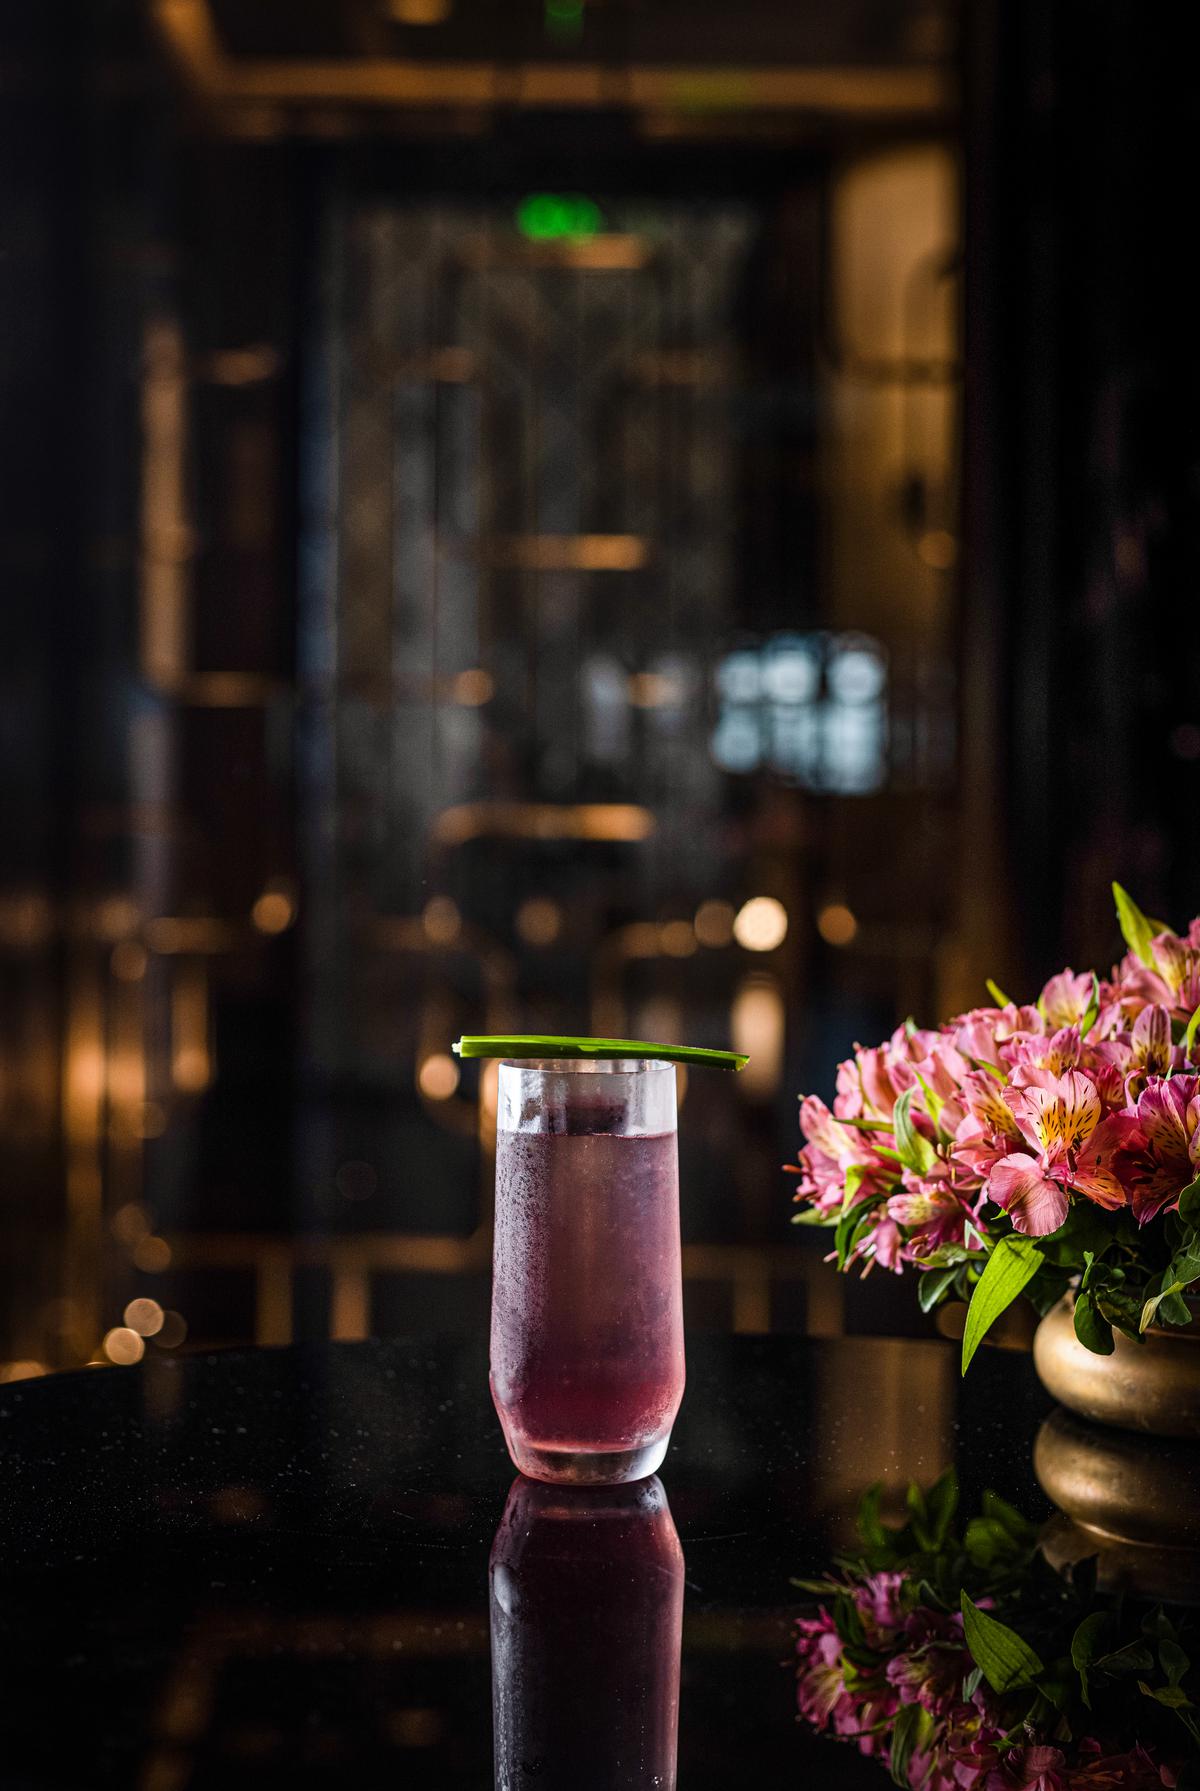 A cocktail inspired by flowers at Copitas